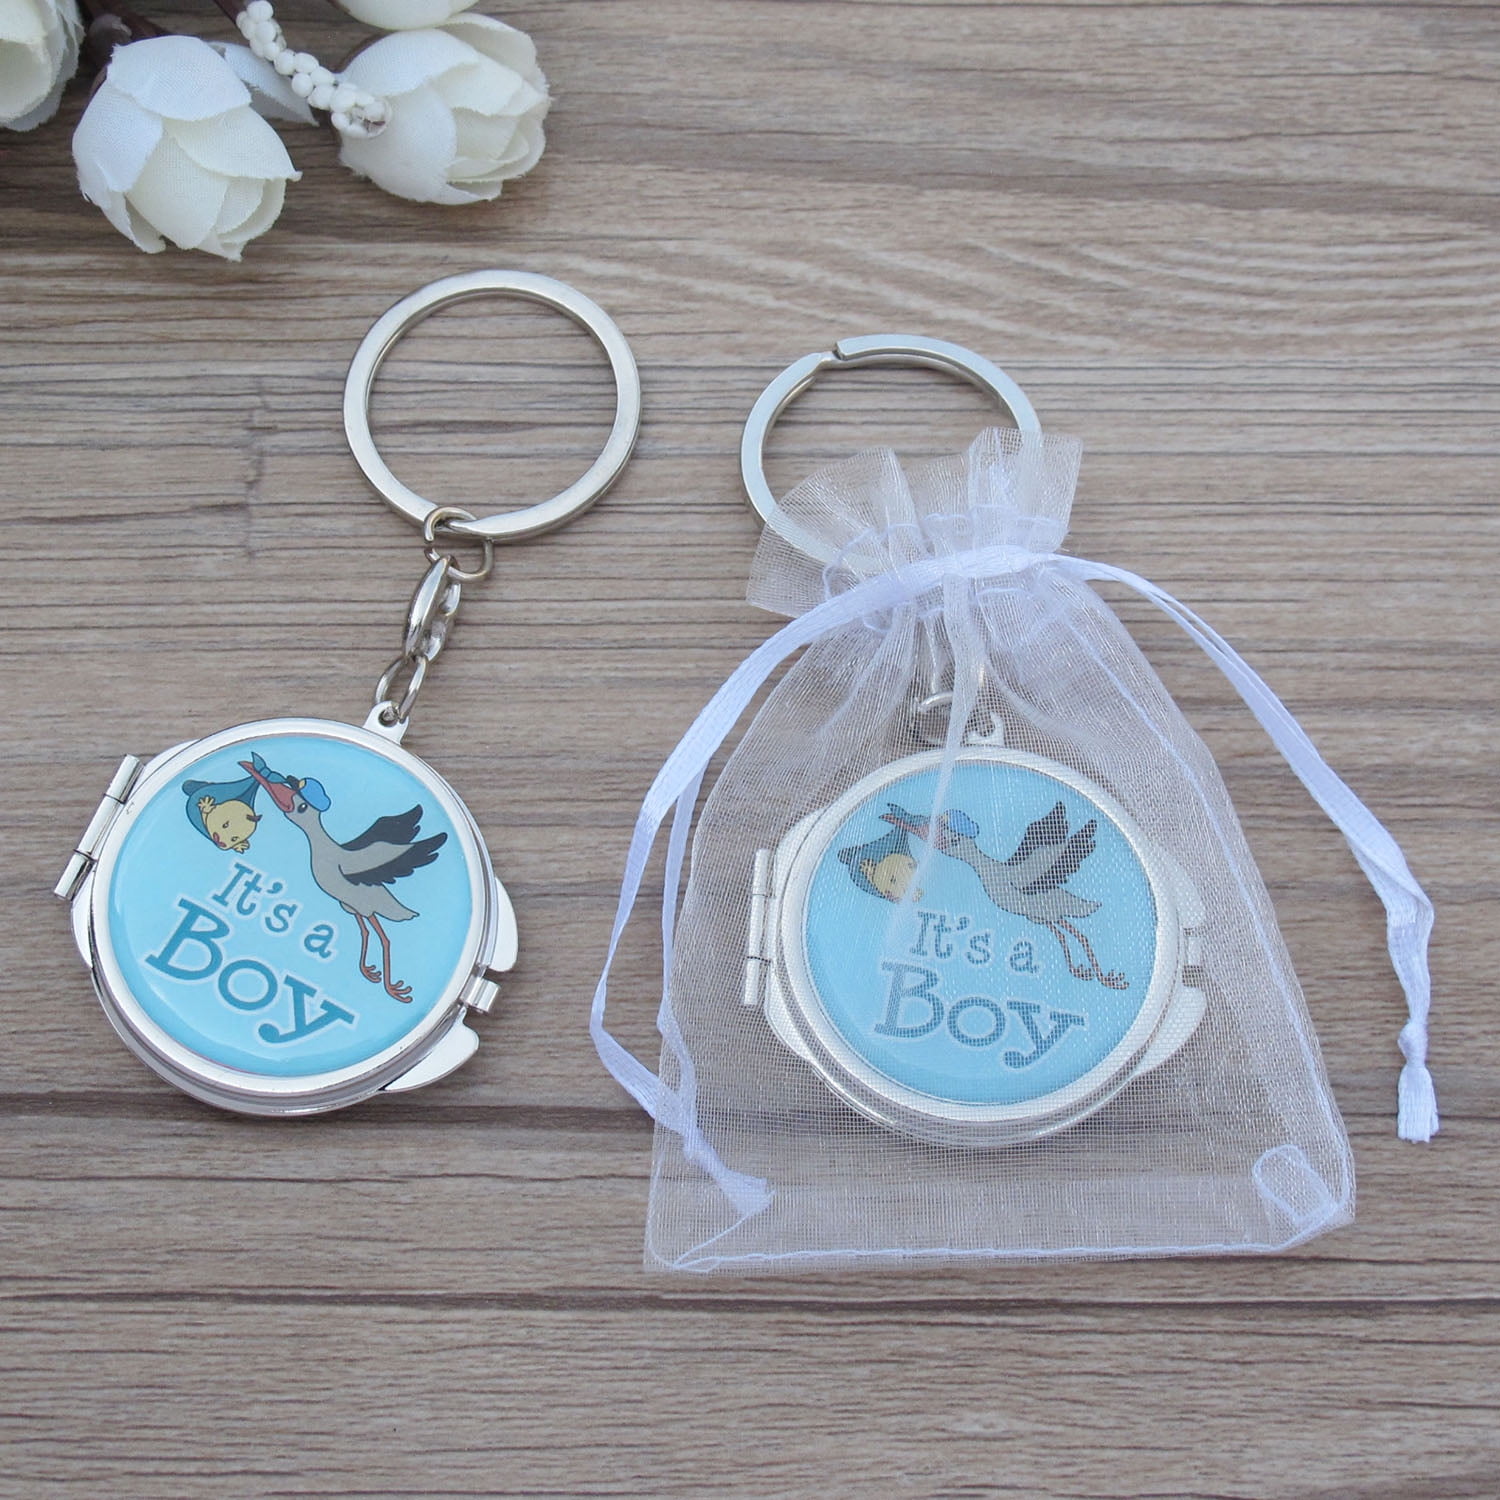 40 Blue Carriage Strollers Keychain Baby Boy Shower Birthday Party Favors 